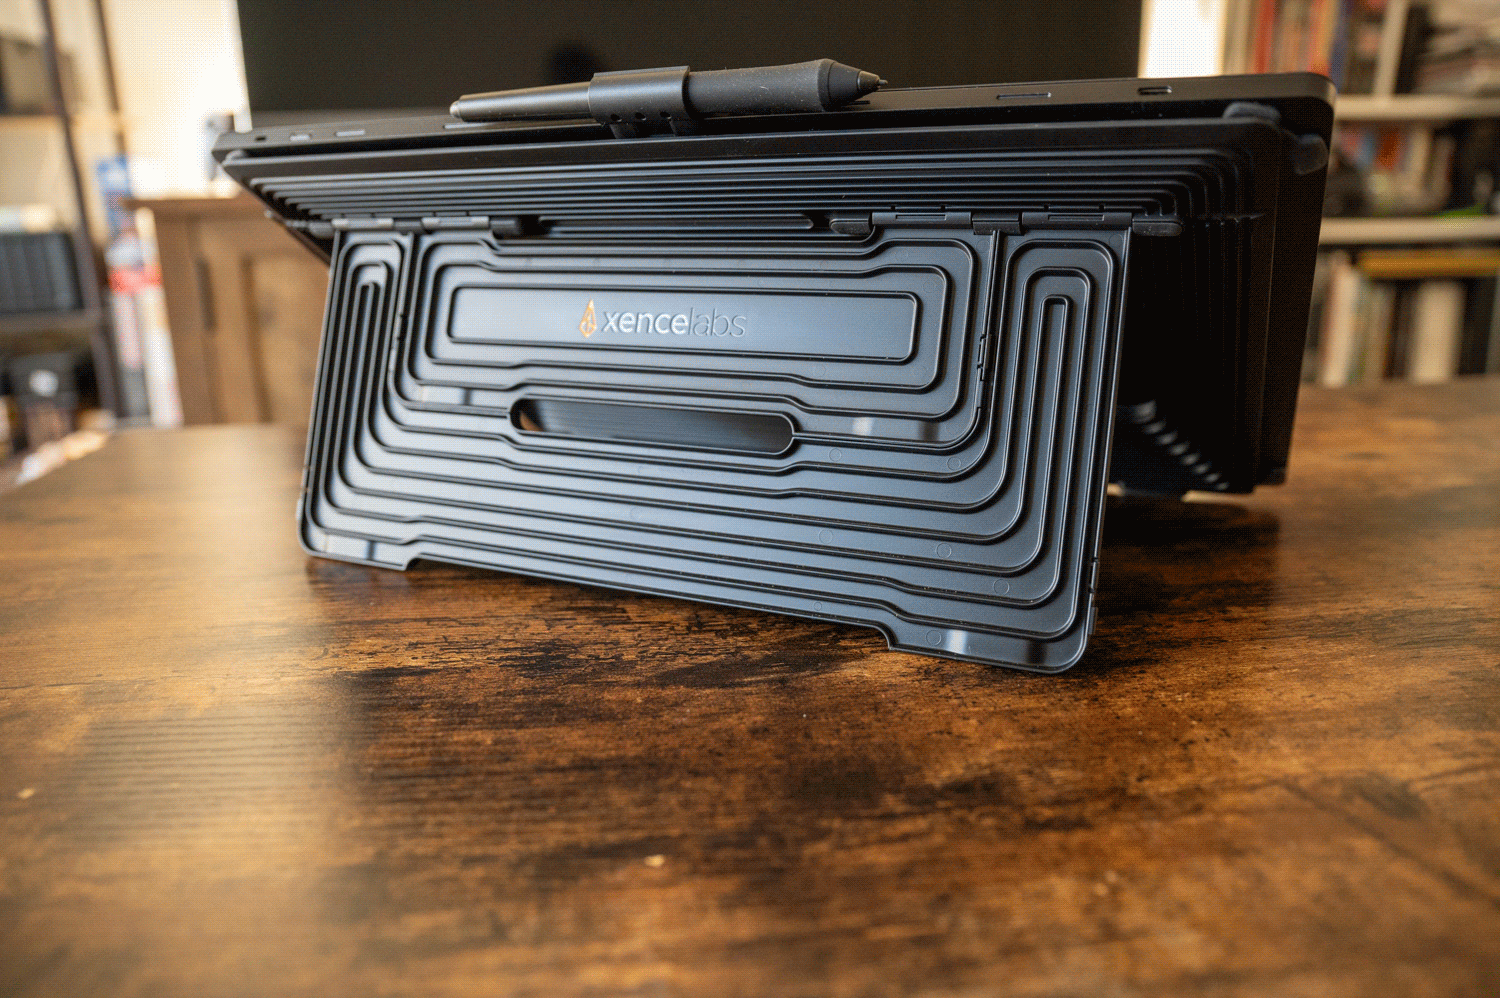 A graphics tablet is positioned on a wooden desk with its back facing the camera. A pen rests on top of the tablet. The back features a unique ridged design with a logo reading "XenceLabs." Bookshelves can be seen blurred in the background.